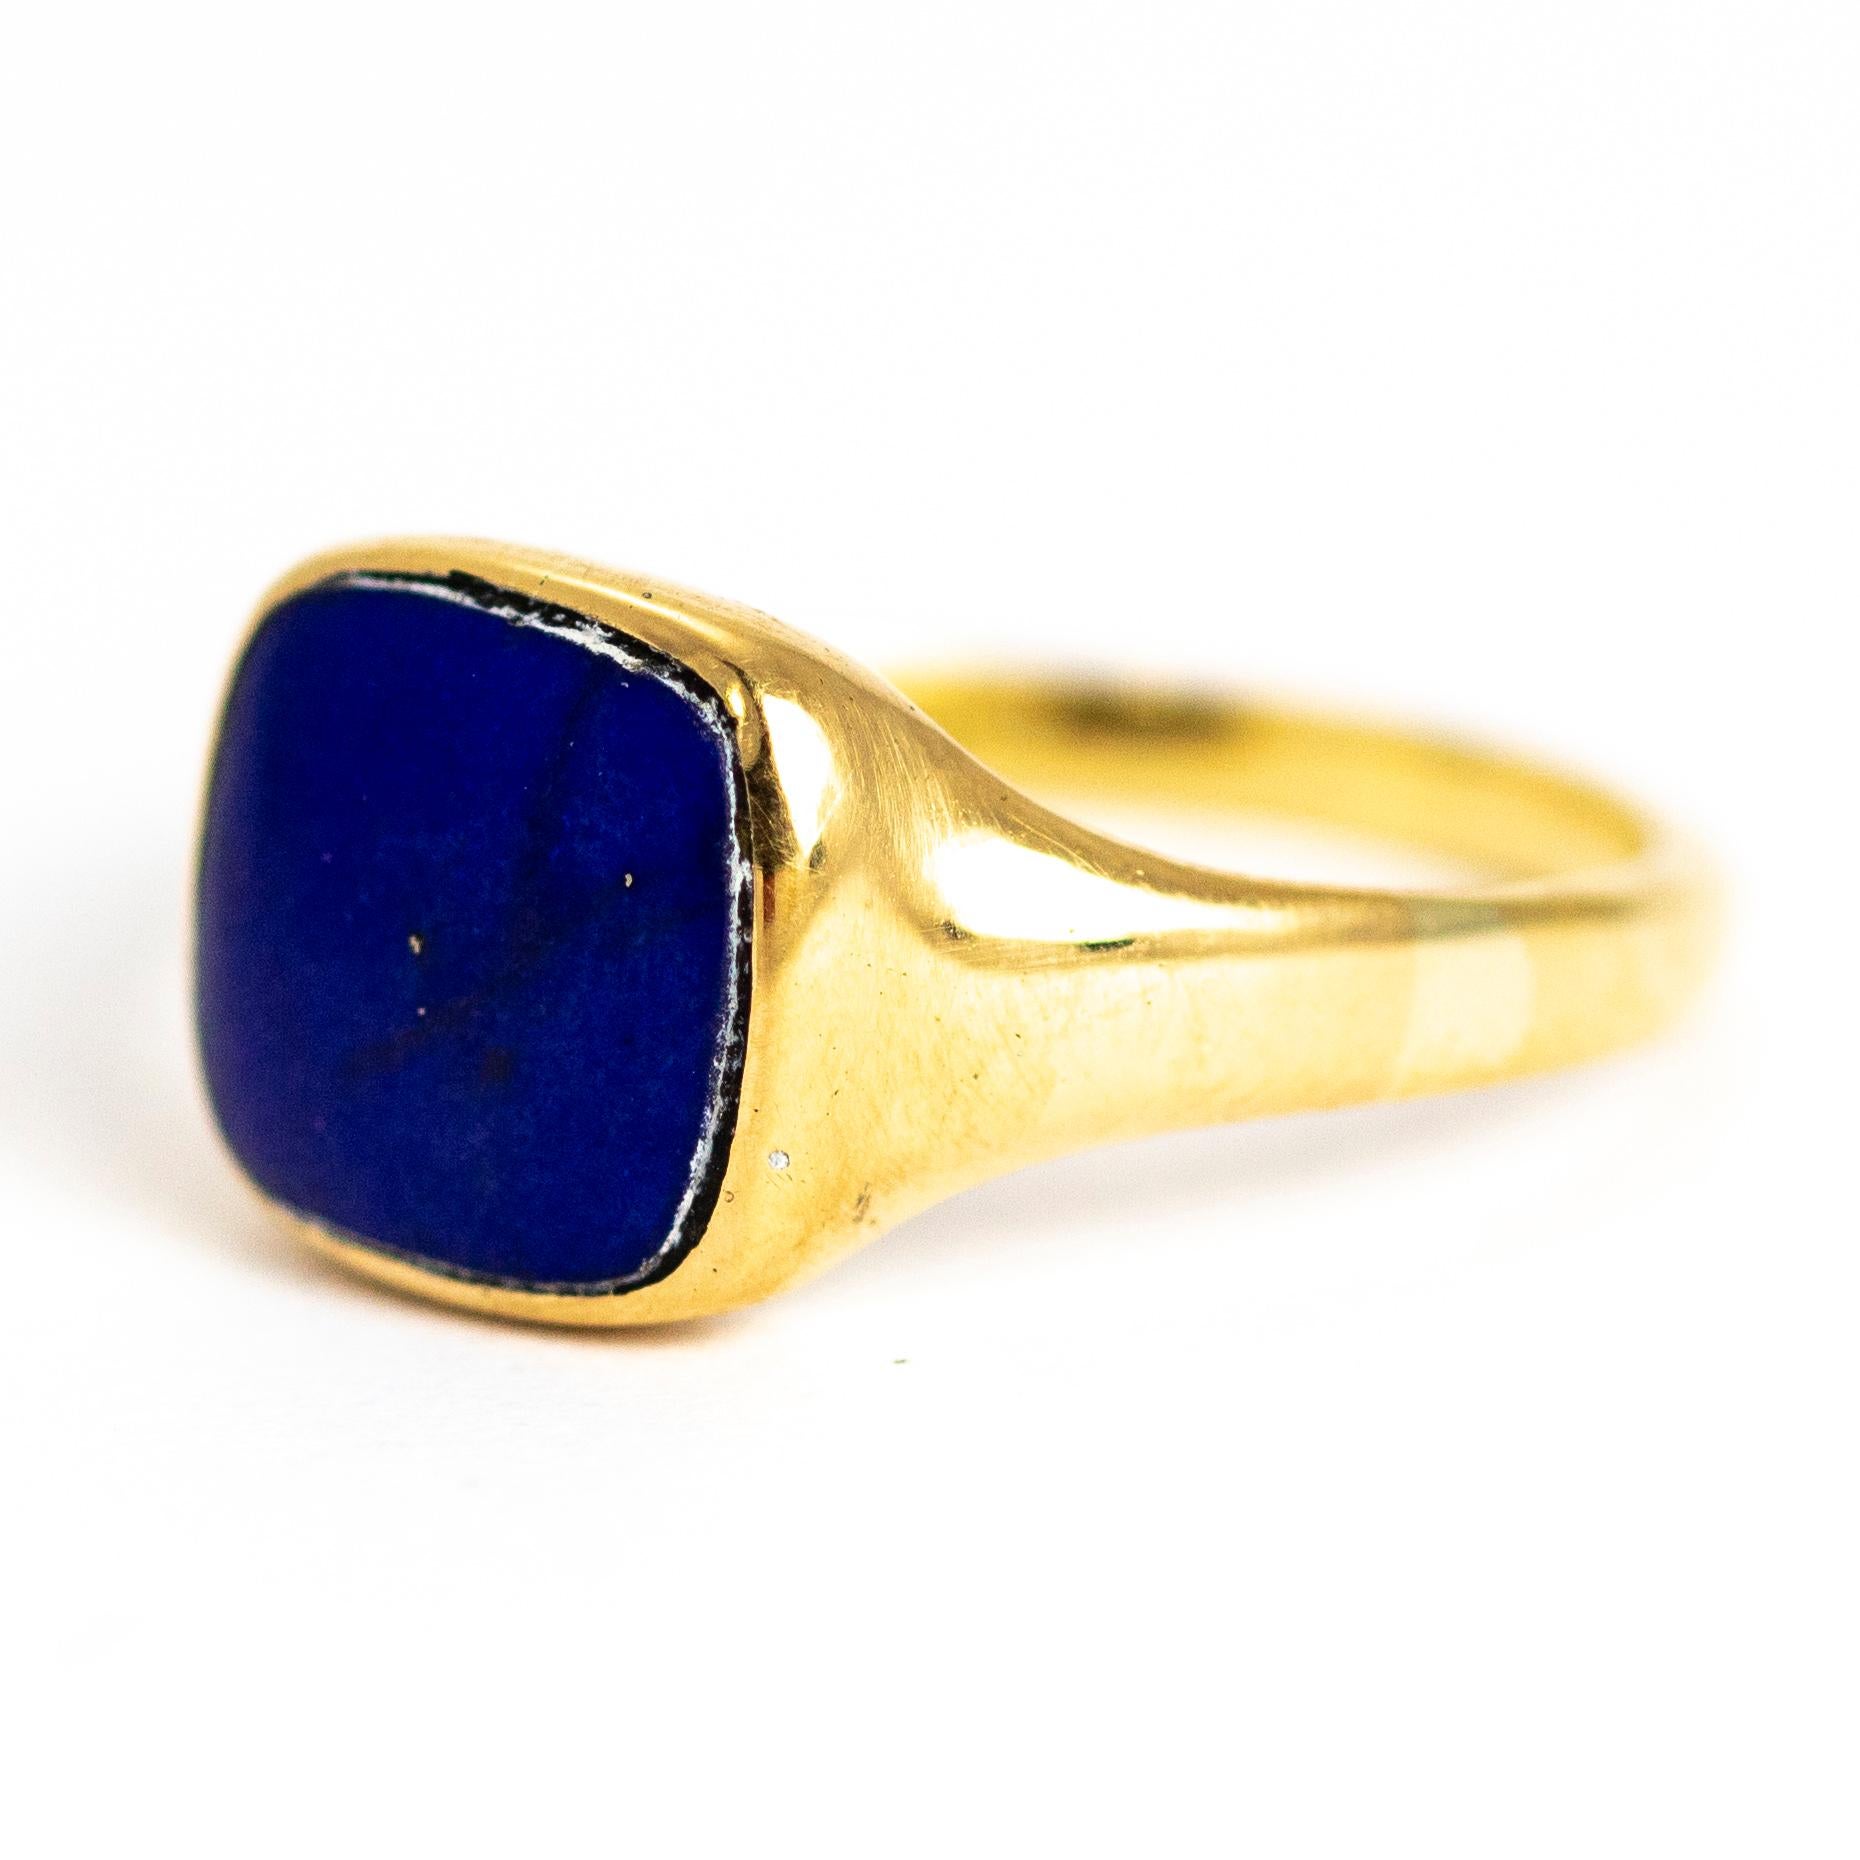 A superb vintage signet ring set with a rounded square lapis lazuli with beautiful colour. Modelled in 18 carat yellow gold.

Ring Size: UK R, US 8